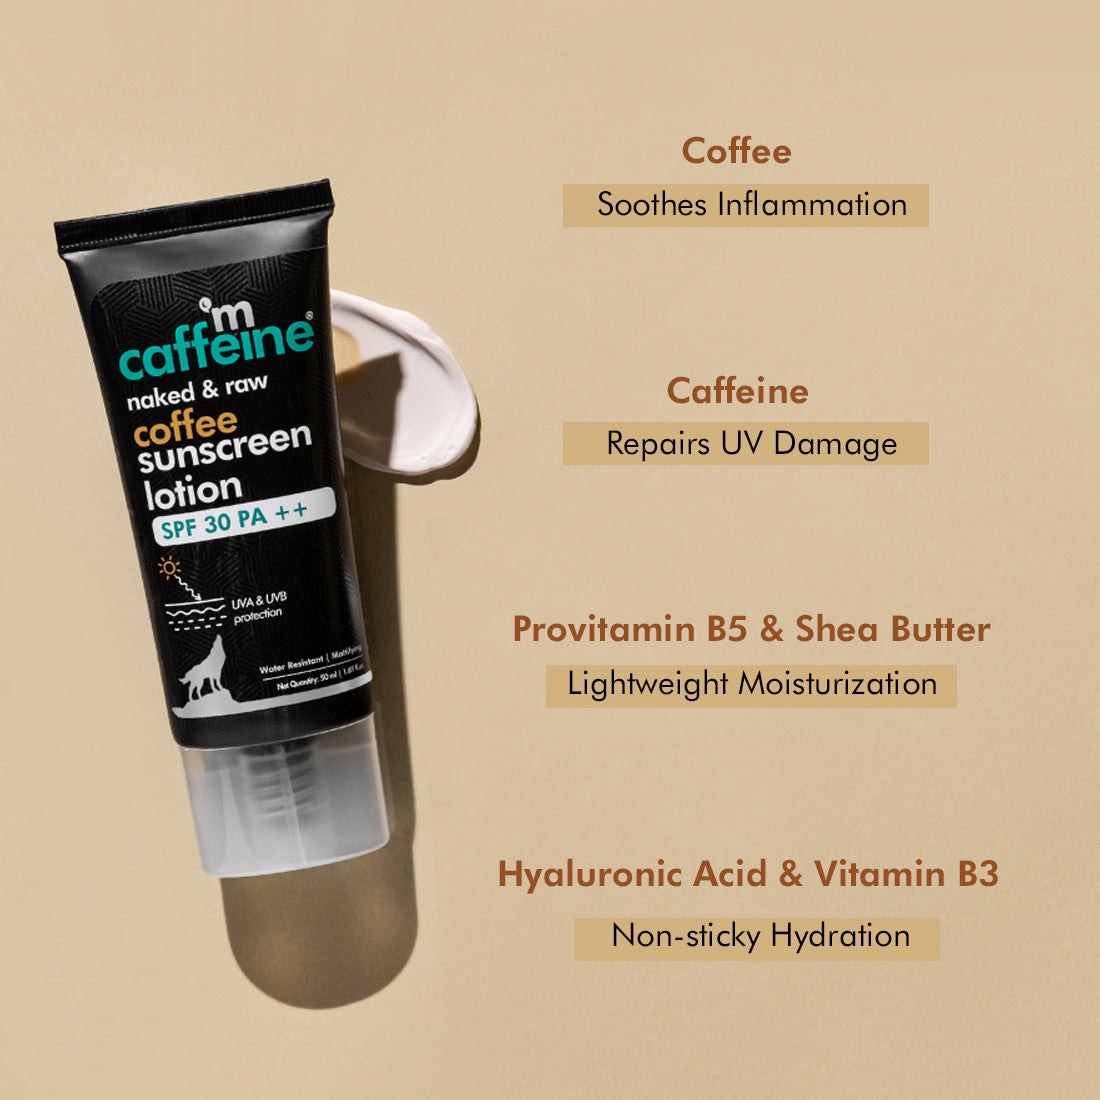 mCaffeine SPF 30 PA++ Coffee Sunscreen Lotion - Water-Resistant Matte Gel Cream with No White Cast